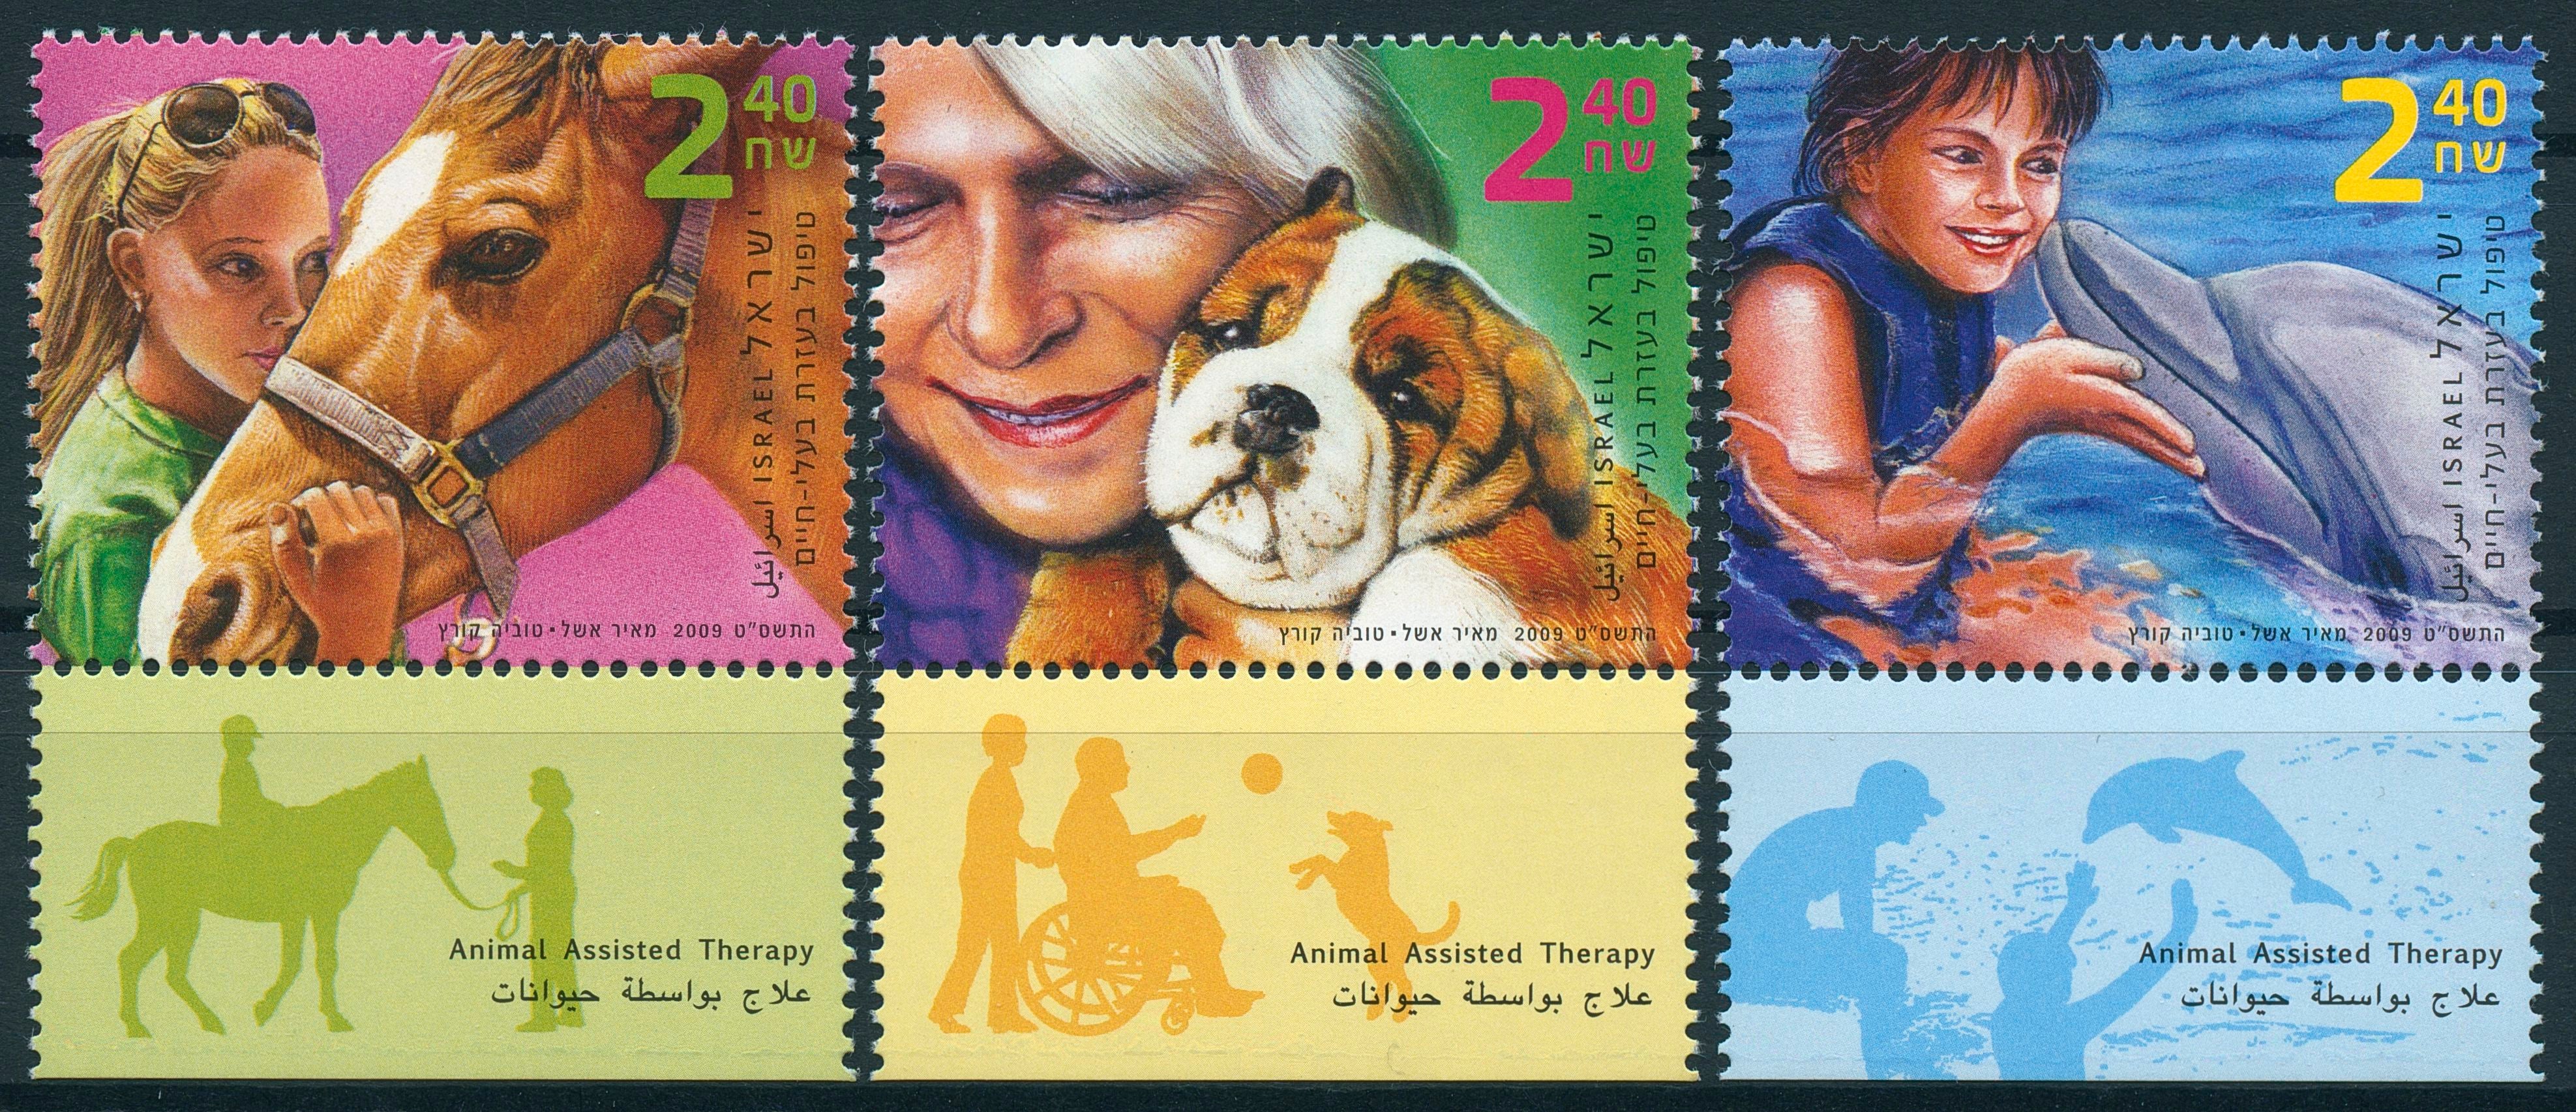 Israel Stamps 2009 MNH Animal Assisted Theraphy Dogs Horses Dolpins 3v Set